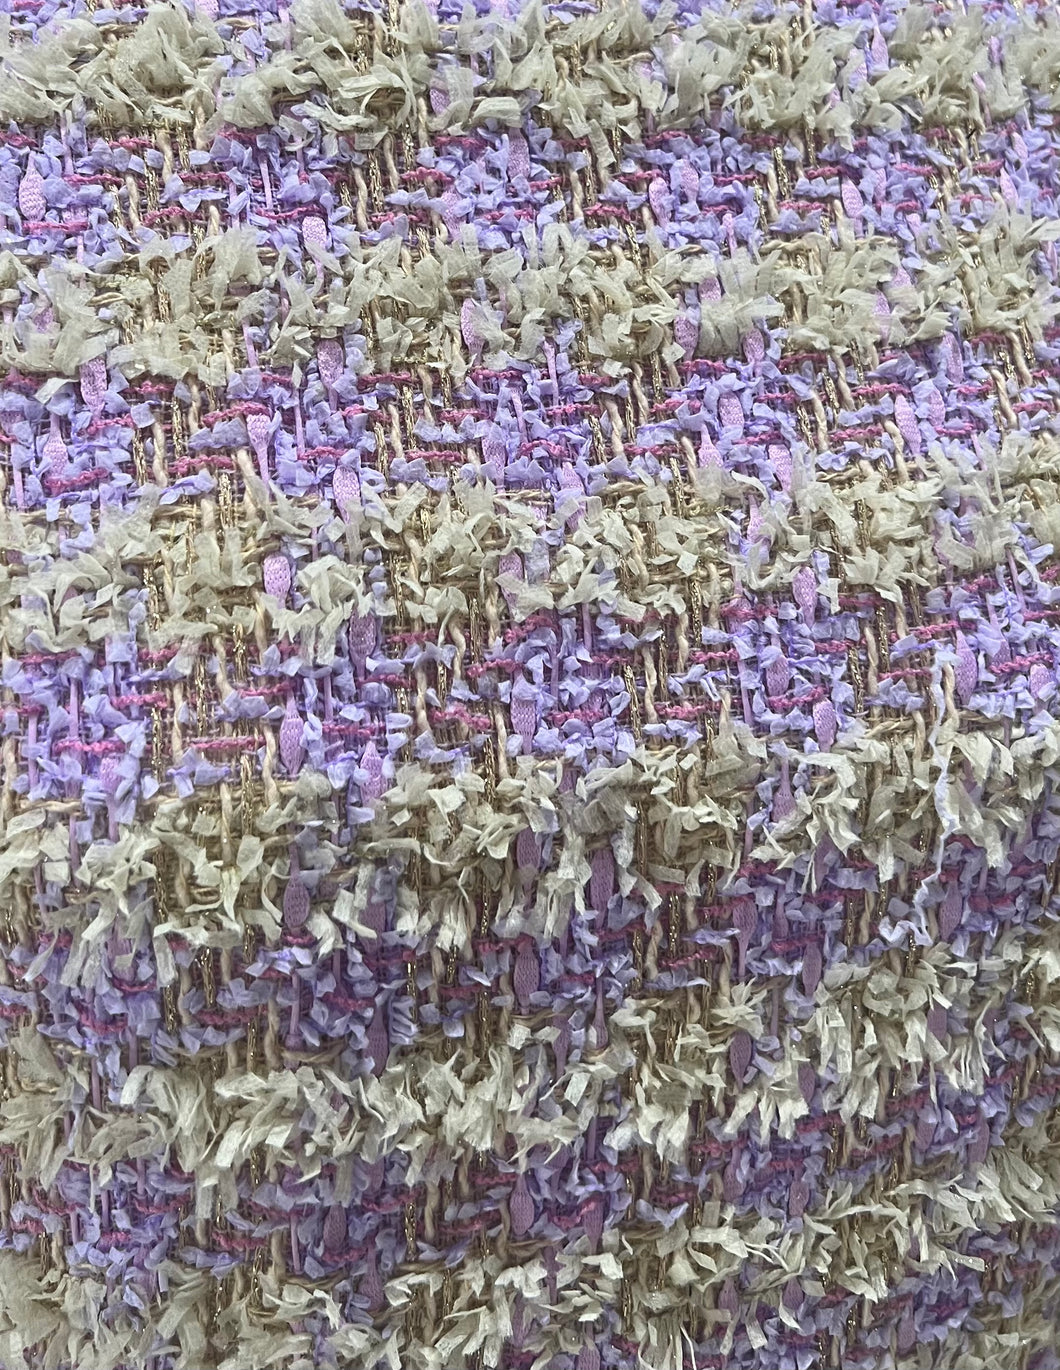 Linton Tweeds - Lilac, Purple, Metallic Gold and Pink Couture Boucle